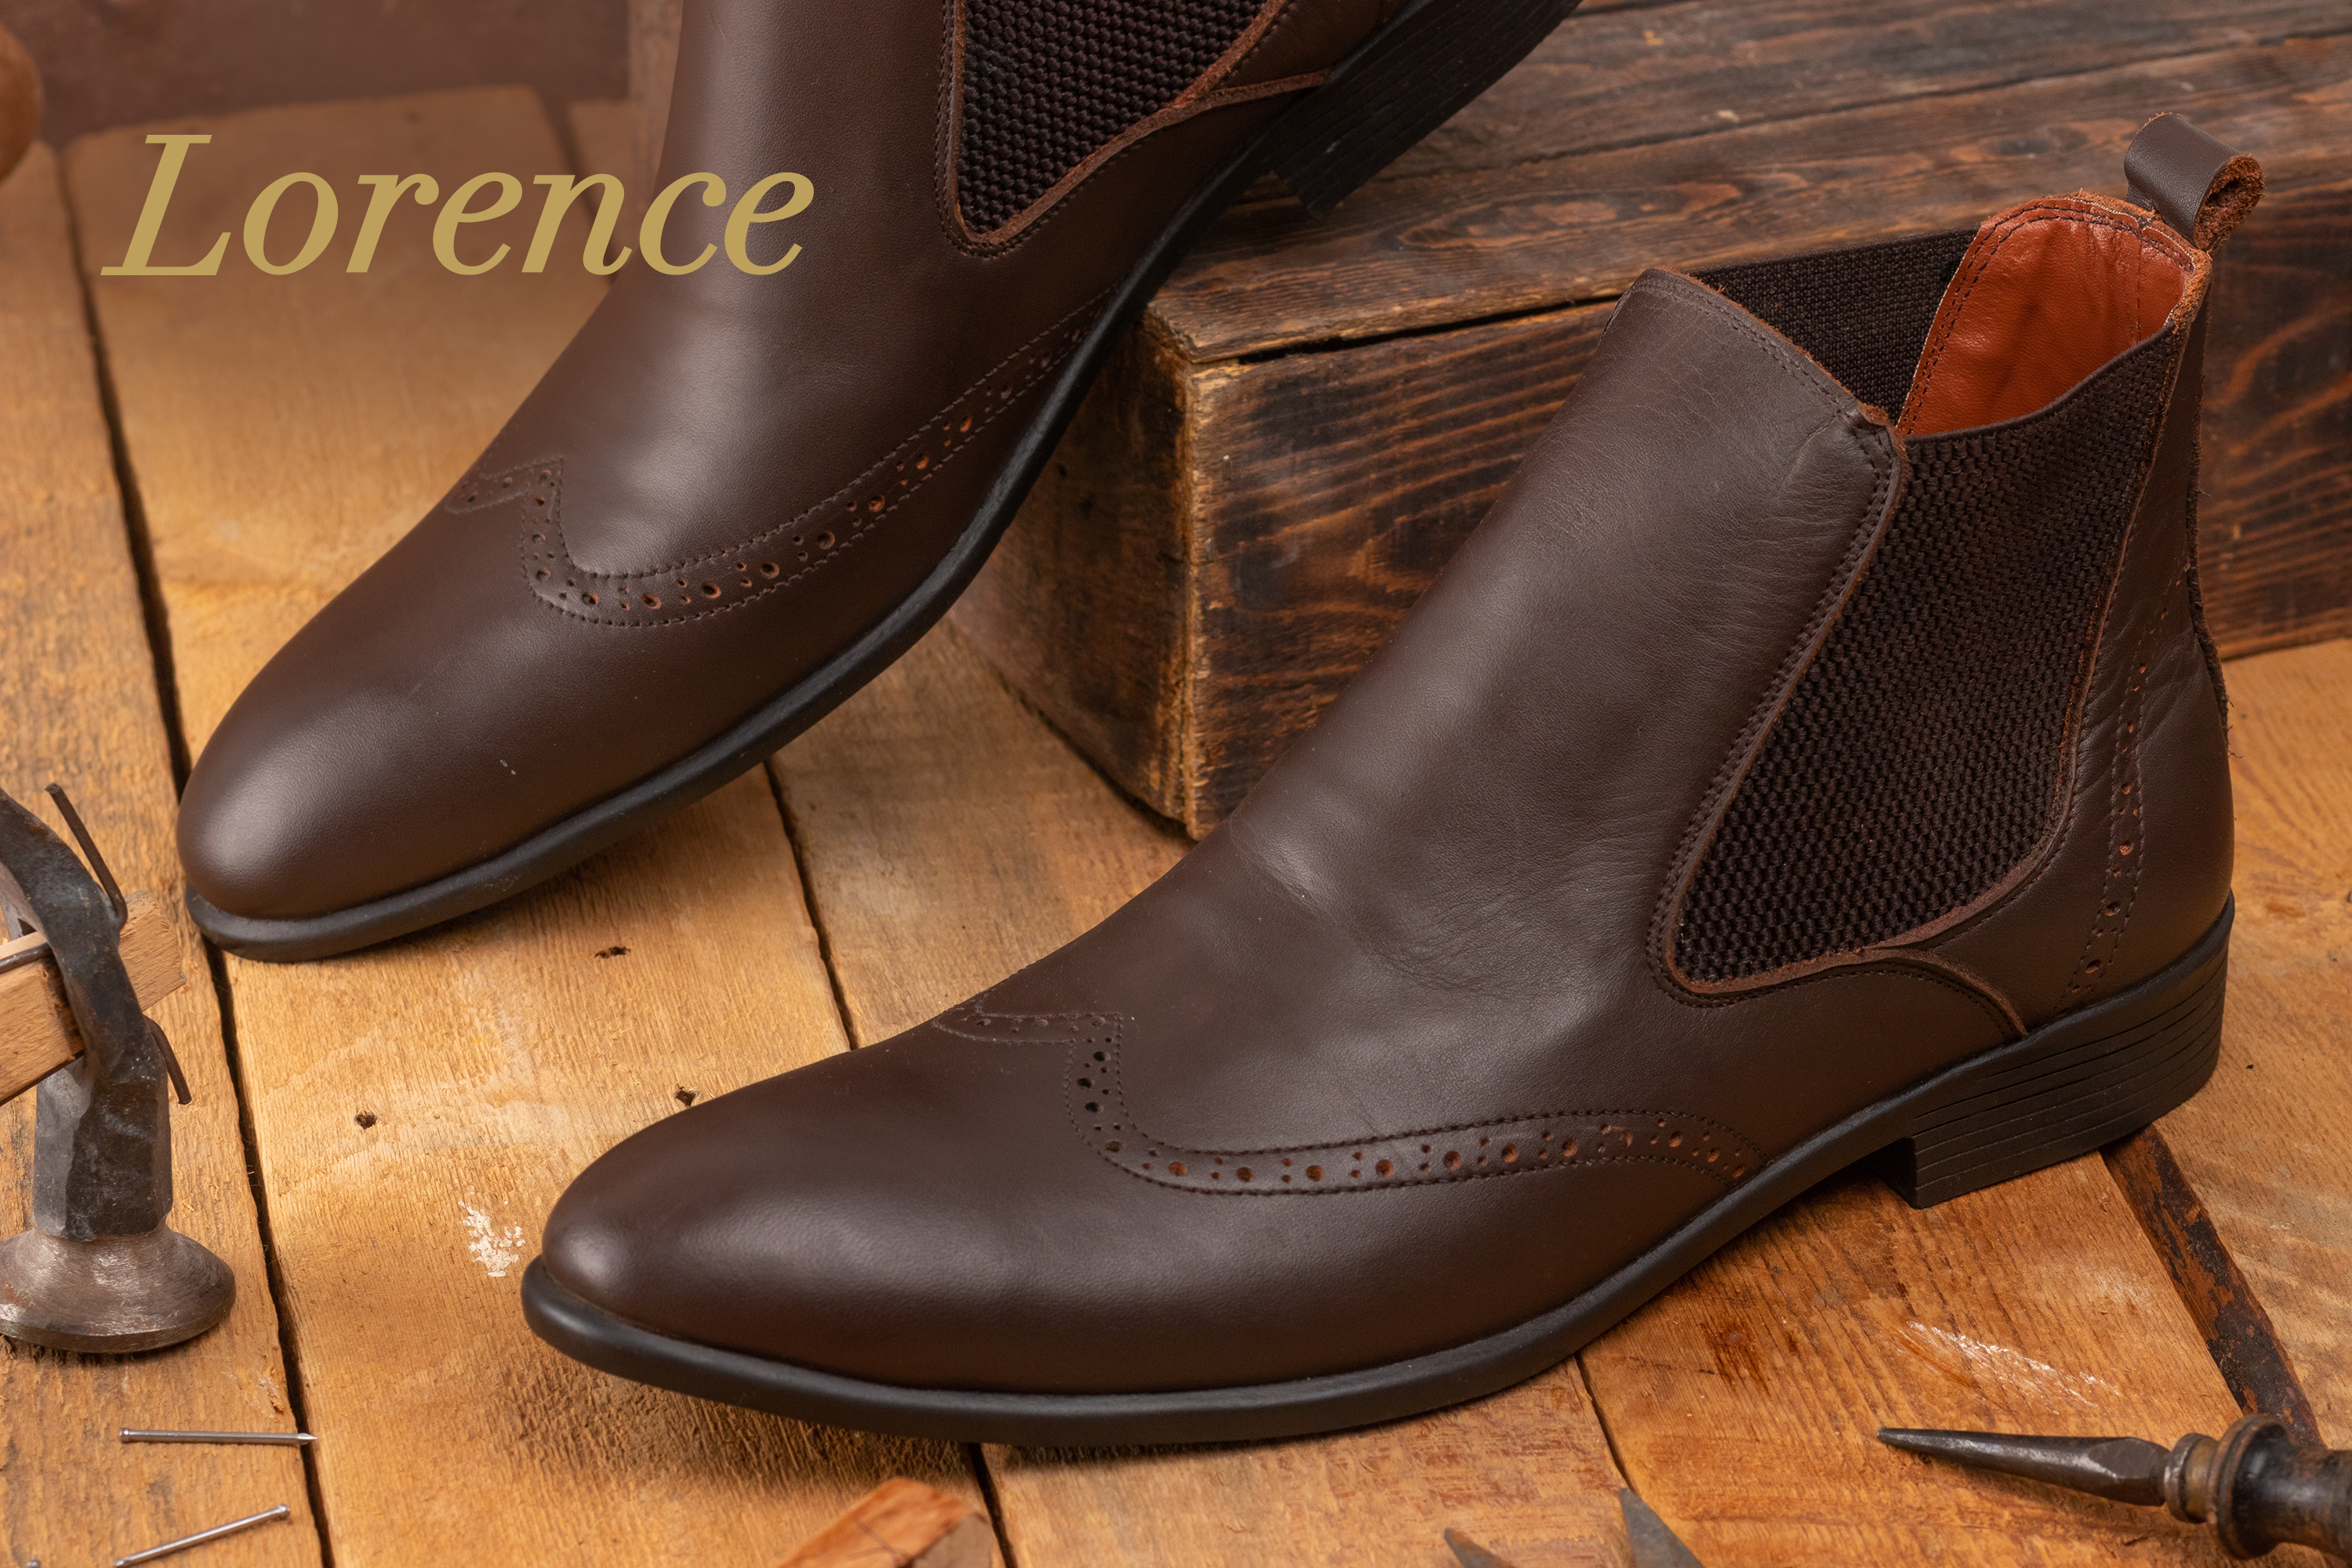 Confer Natural Satin Appearance to Footwear | Lorence Satin Shoe Cream